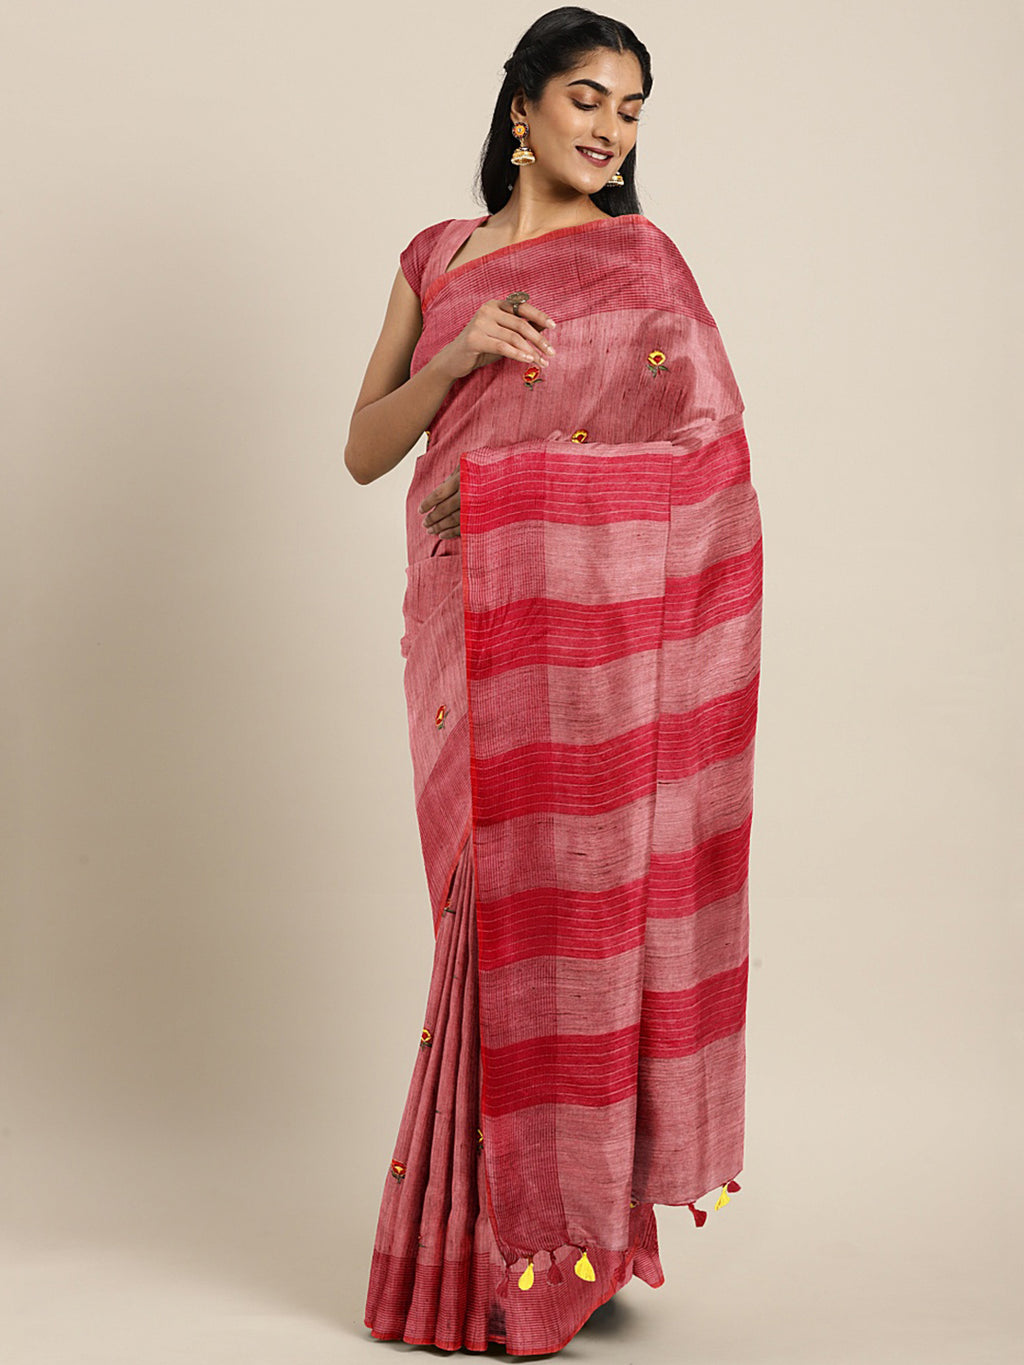 Kalakari India Kota Silk Embroidered Saree With Blouse ALBGSA0172-Saree-Kalakari India-ALBGSA0172-Geographical Indication, Hand Crafted, Heritage Prints, Linen, Natural Dyes, Pure Cotton, Sarees, Sustainable Fabrics, Woven-[Linen,Ethnic,wear,Fashionista,Handloom,Handicraft,Indigo,blockprint,block,print,Cotton,Chanderi,Blue, latest,classy,party,bollywood,trendy,summer,style,traditional,formal,elegant,unique,style,hand,block,print, dabu,booti,gift,present,glamorous,affordable,collectible,Sari,Sare